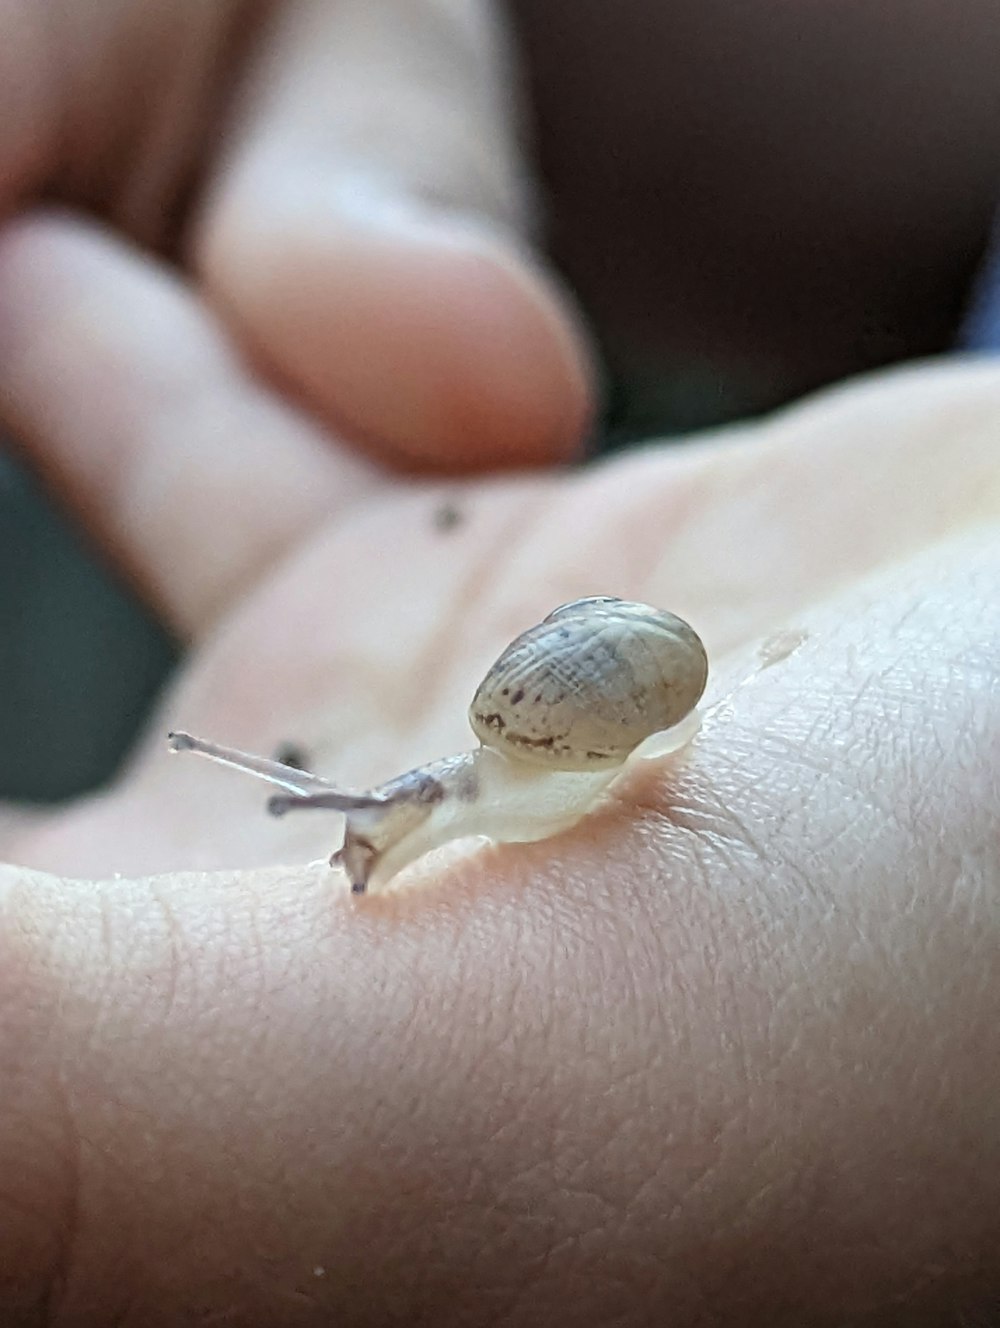 a snail on a person's finger